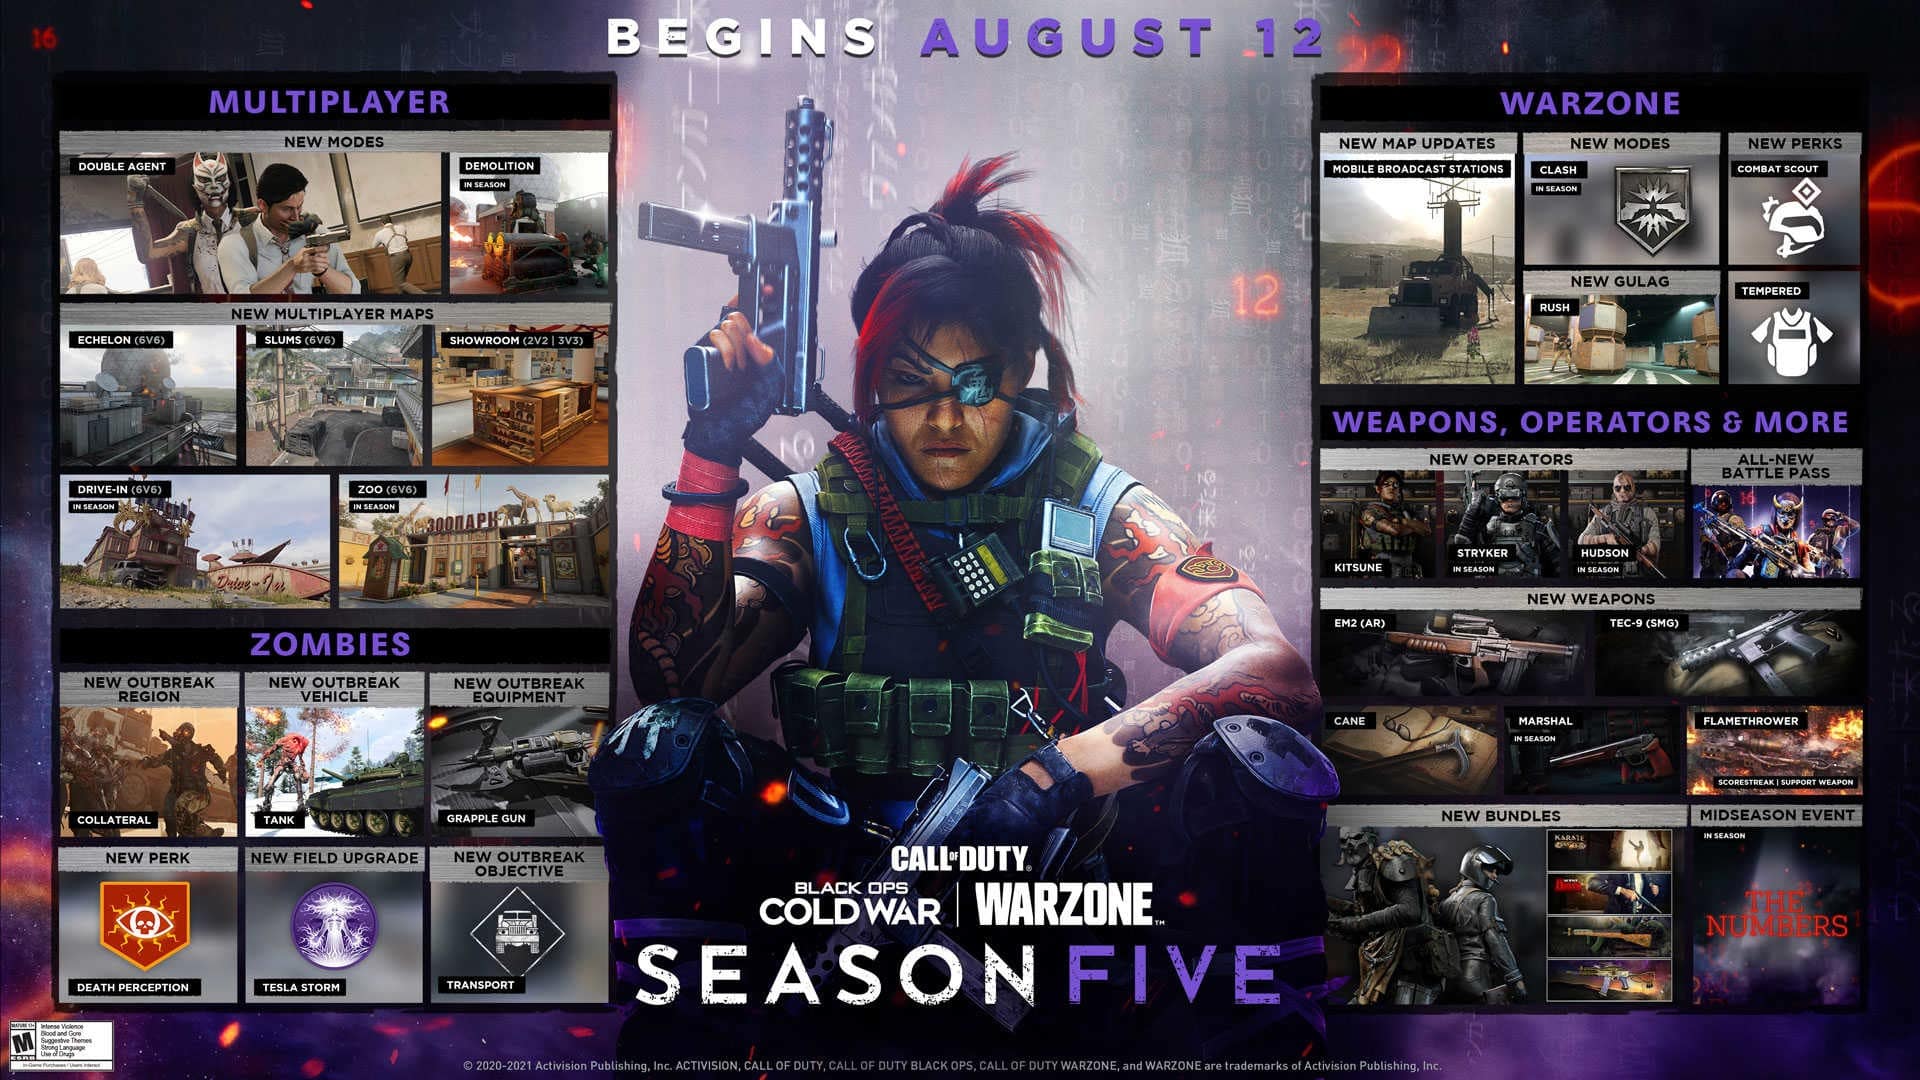 The roadmap to Season 5 is here